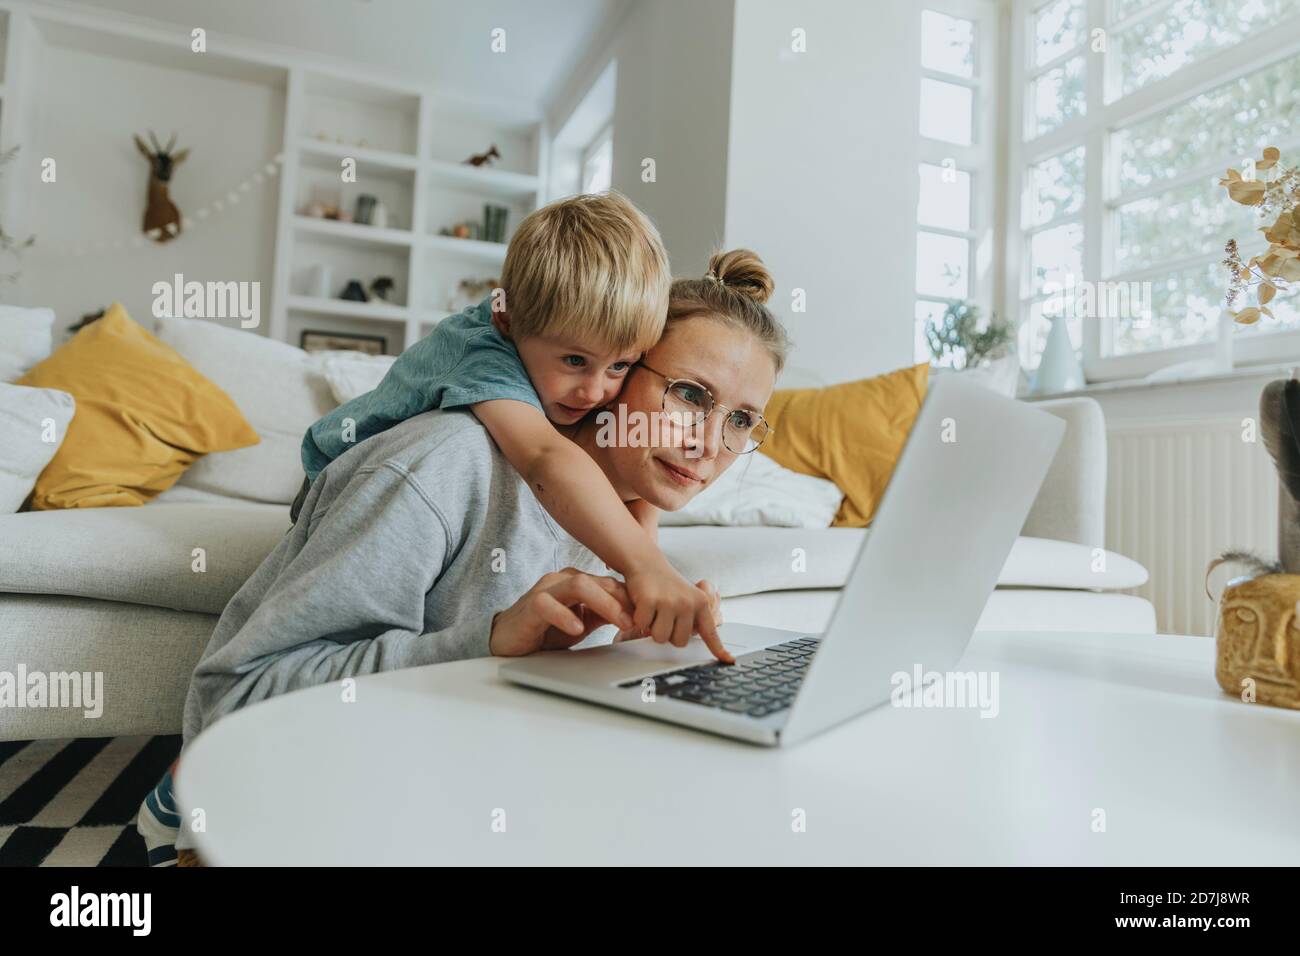 Boy doing mischief on laptop while standing behind mother at home Stock Photo